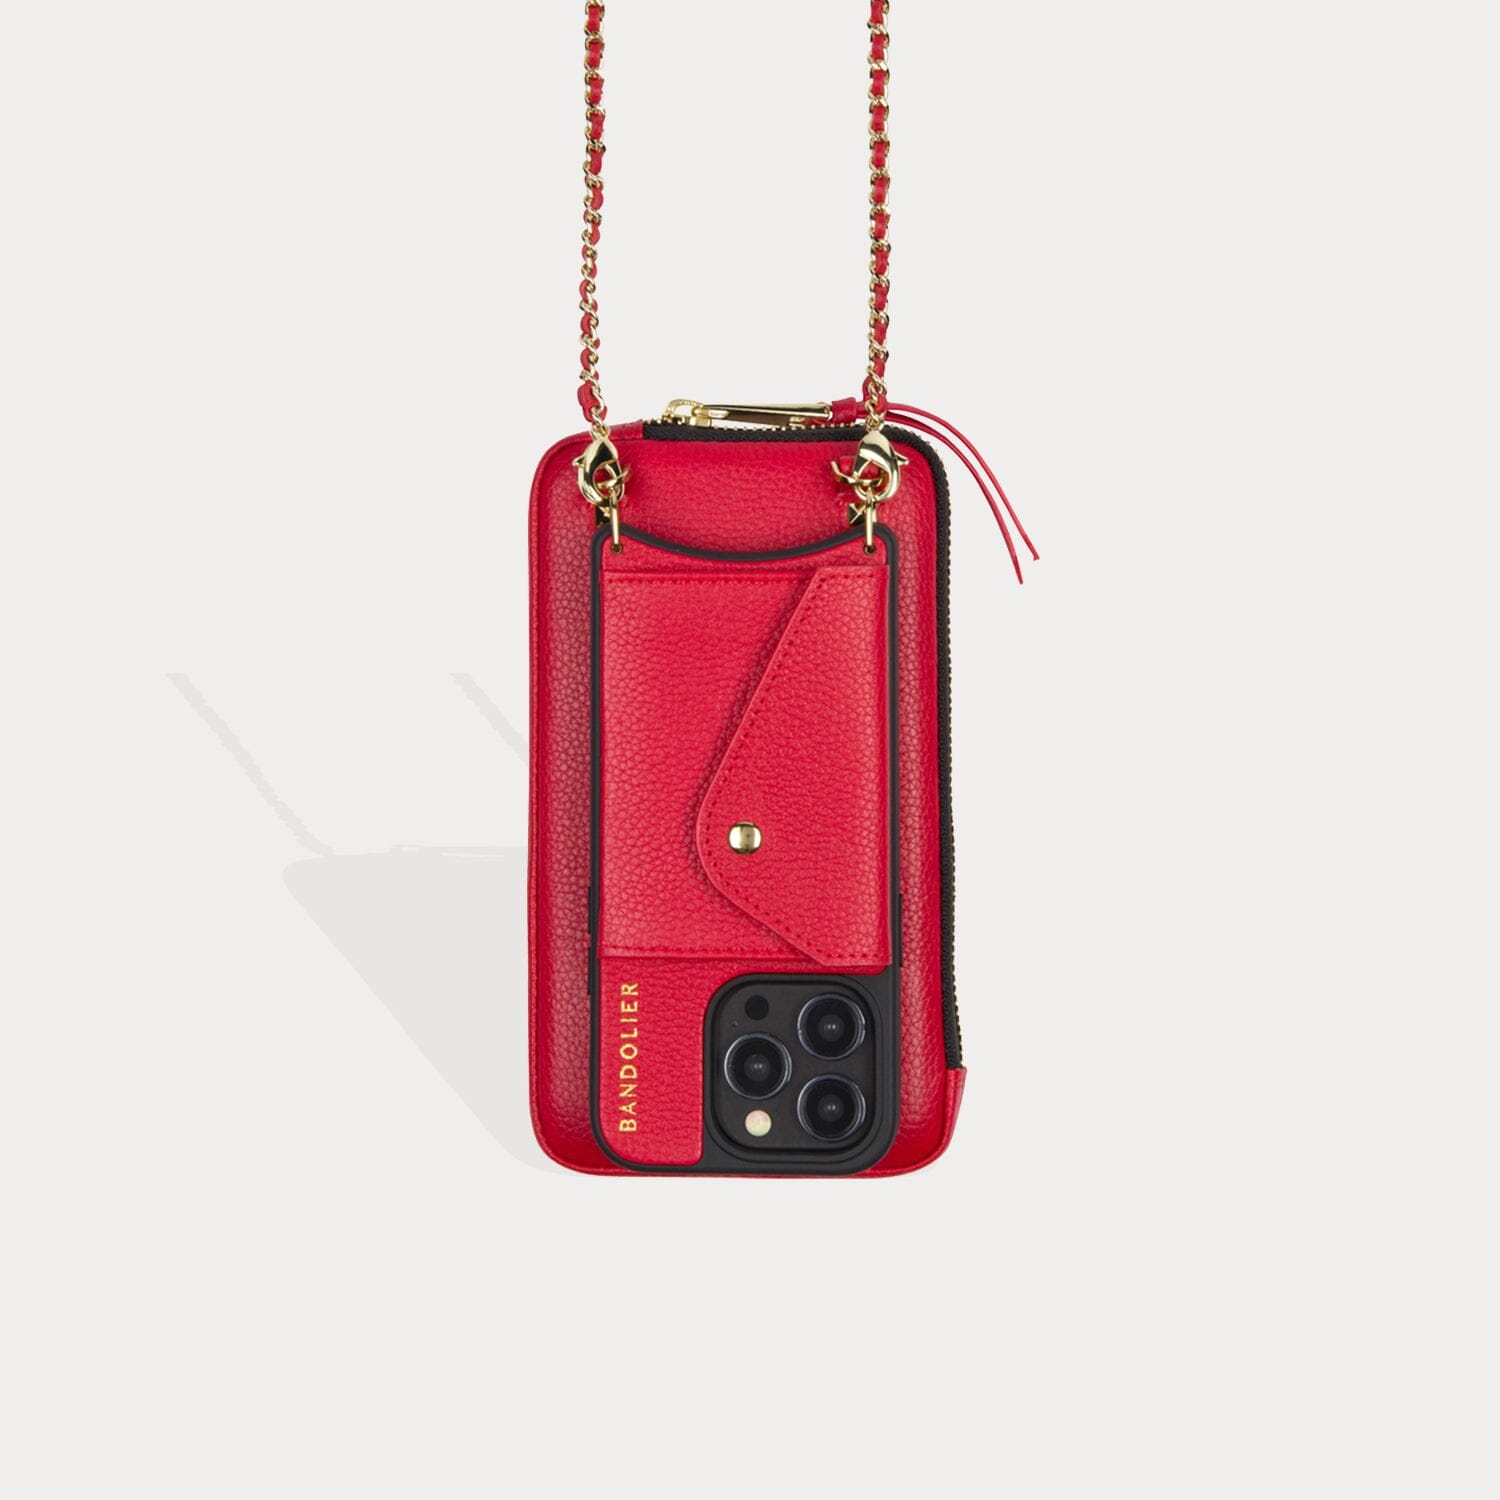 Pebble Leather Expanded Zip Pouch - Red/Gold Pouch Bandolier 